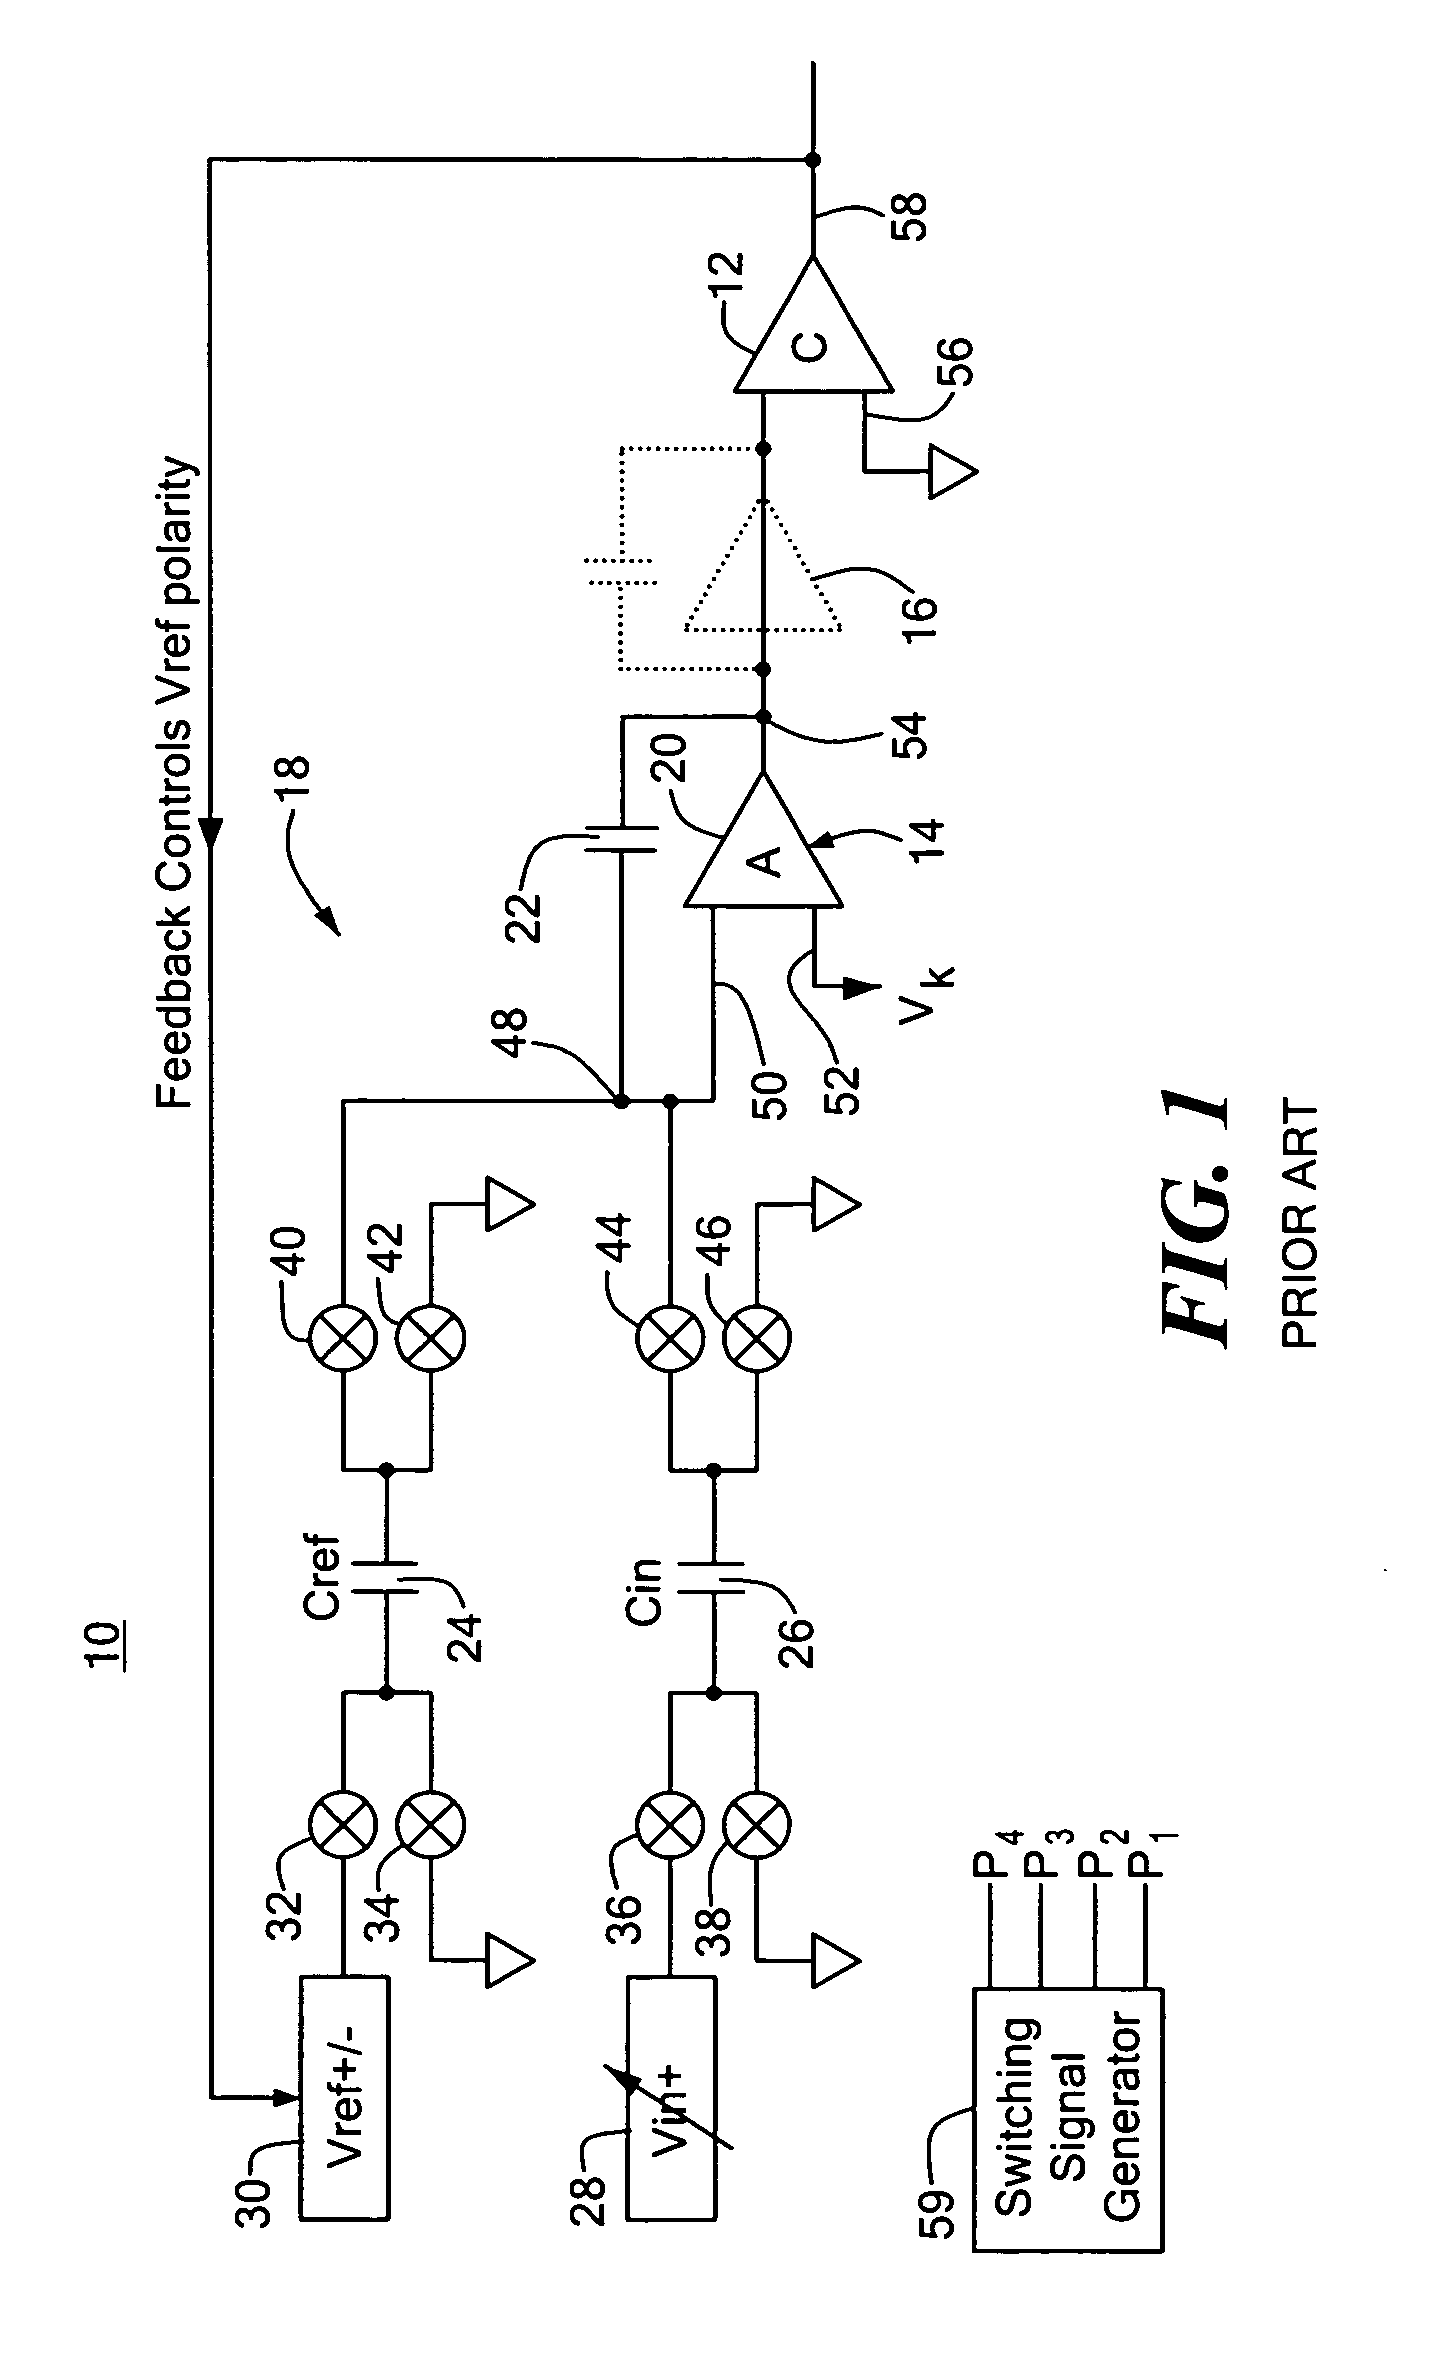 Variable capacitance switched capacitor input system and method